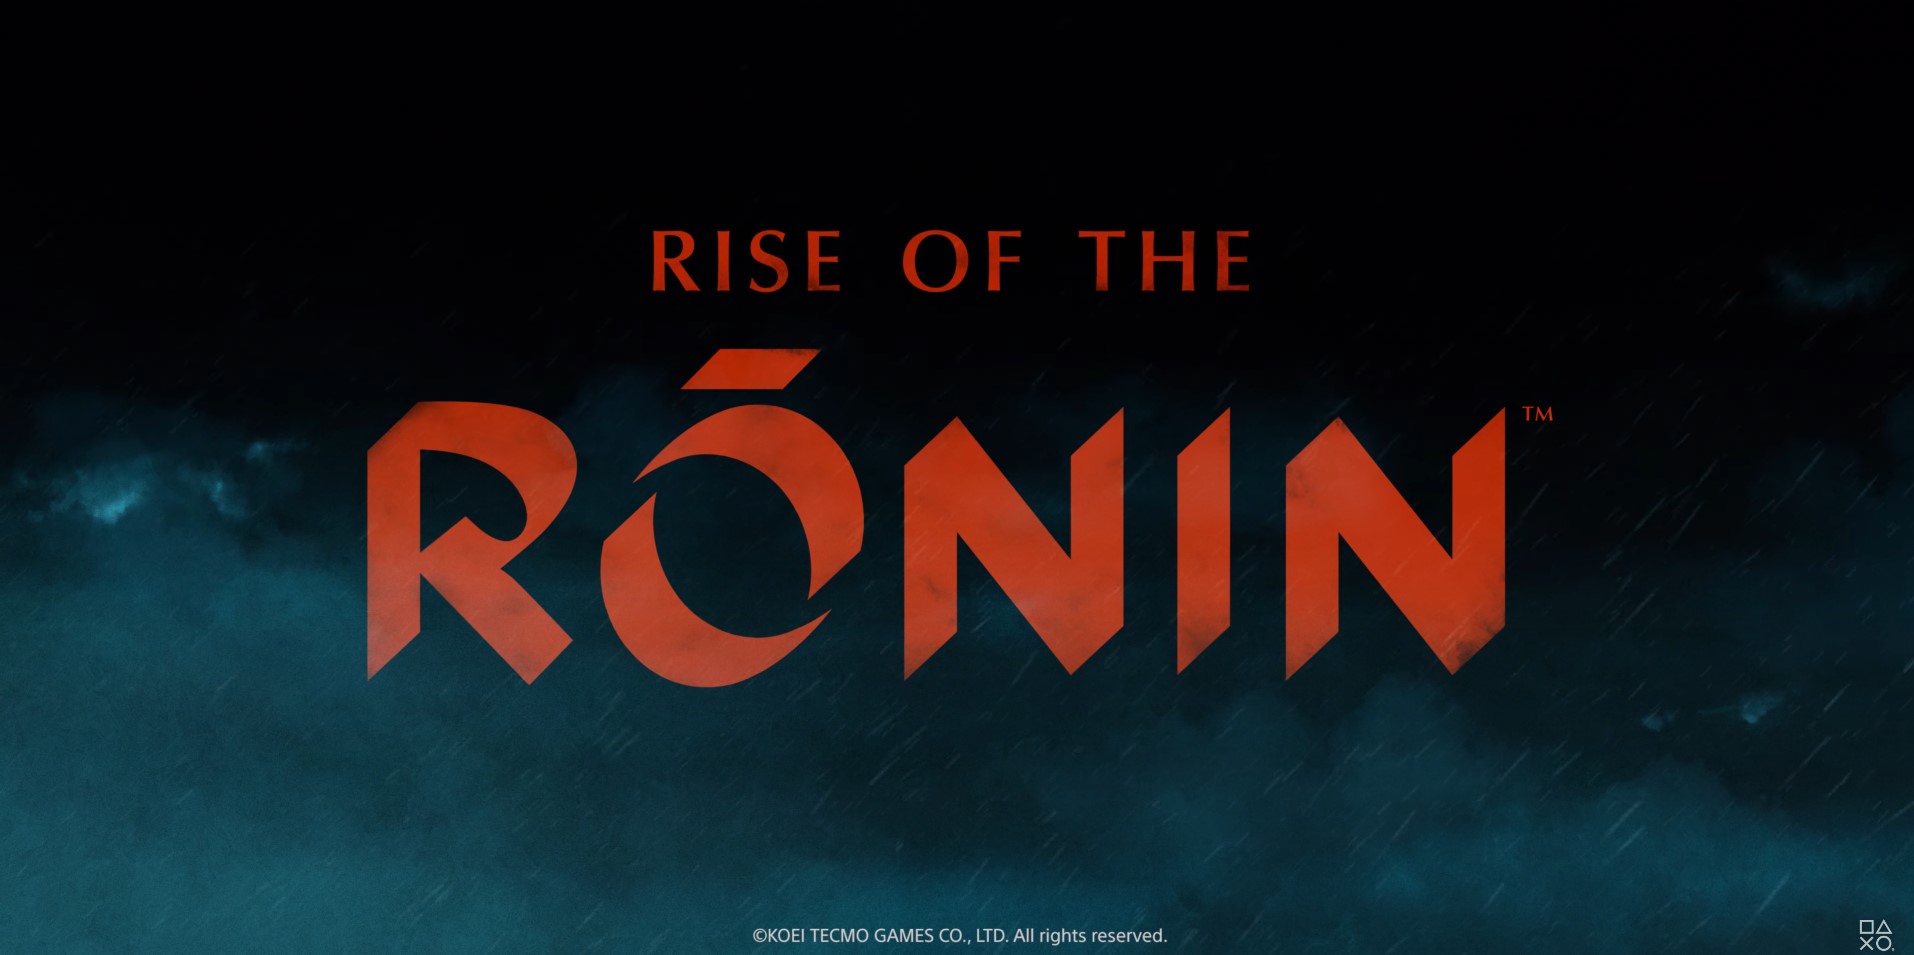 RISE OF RONIN